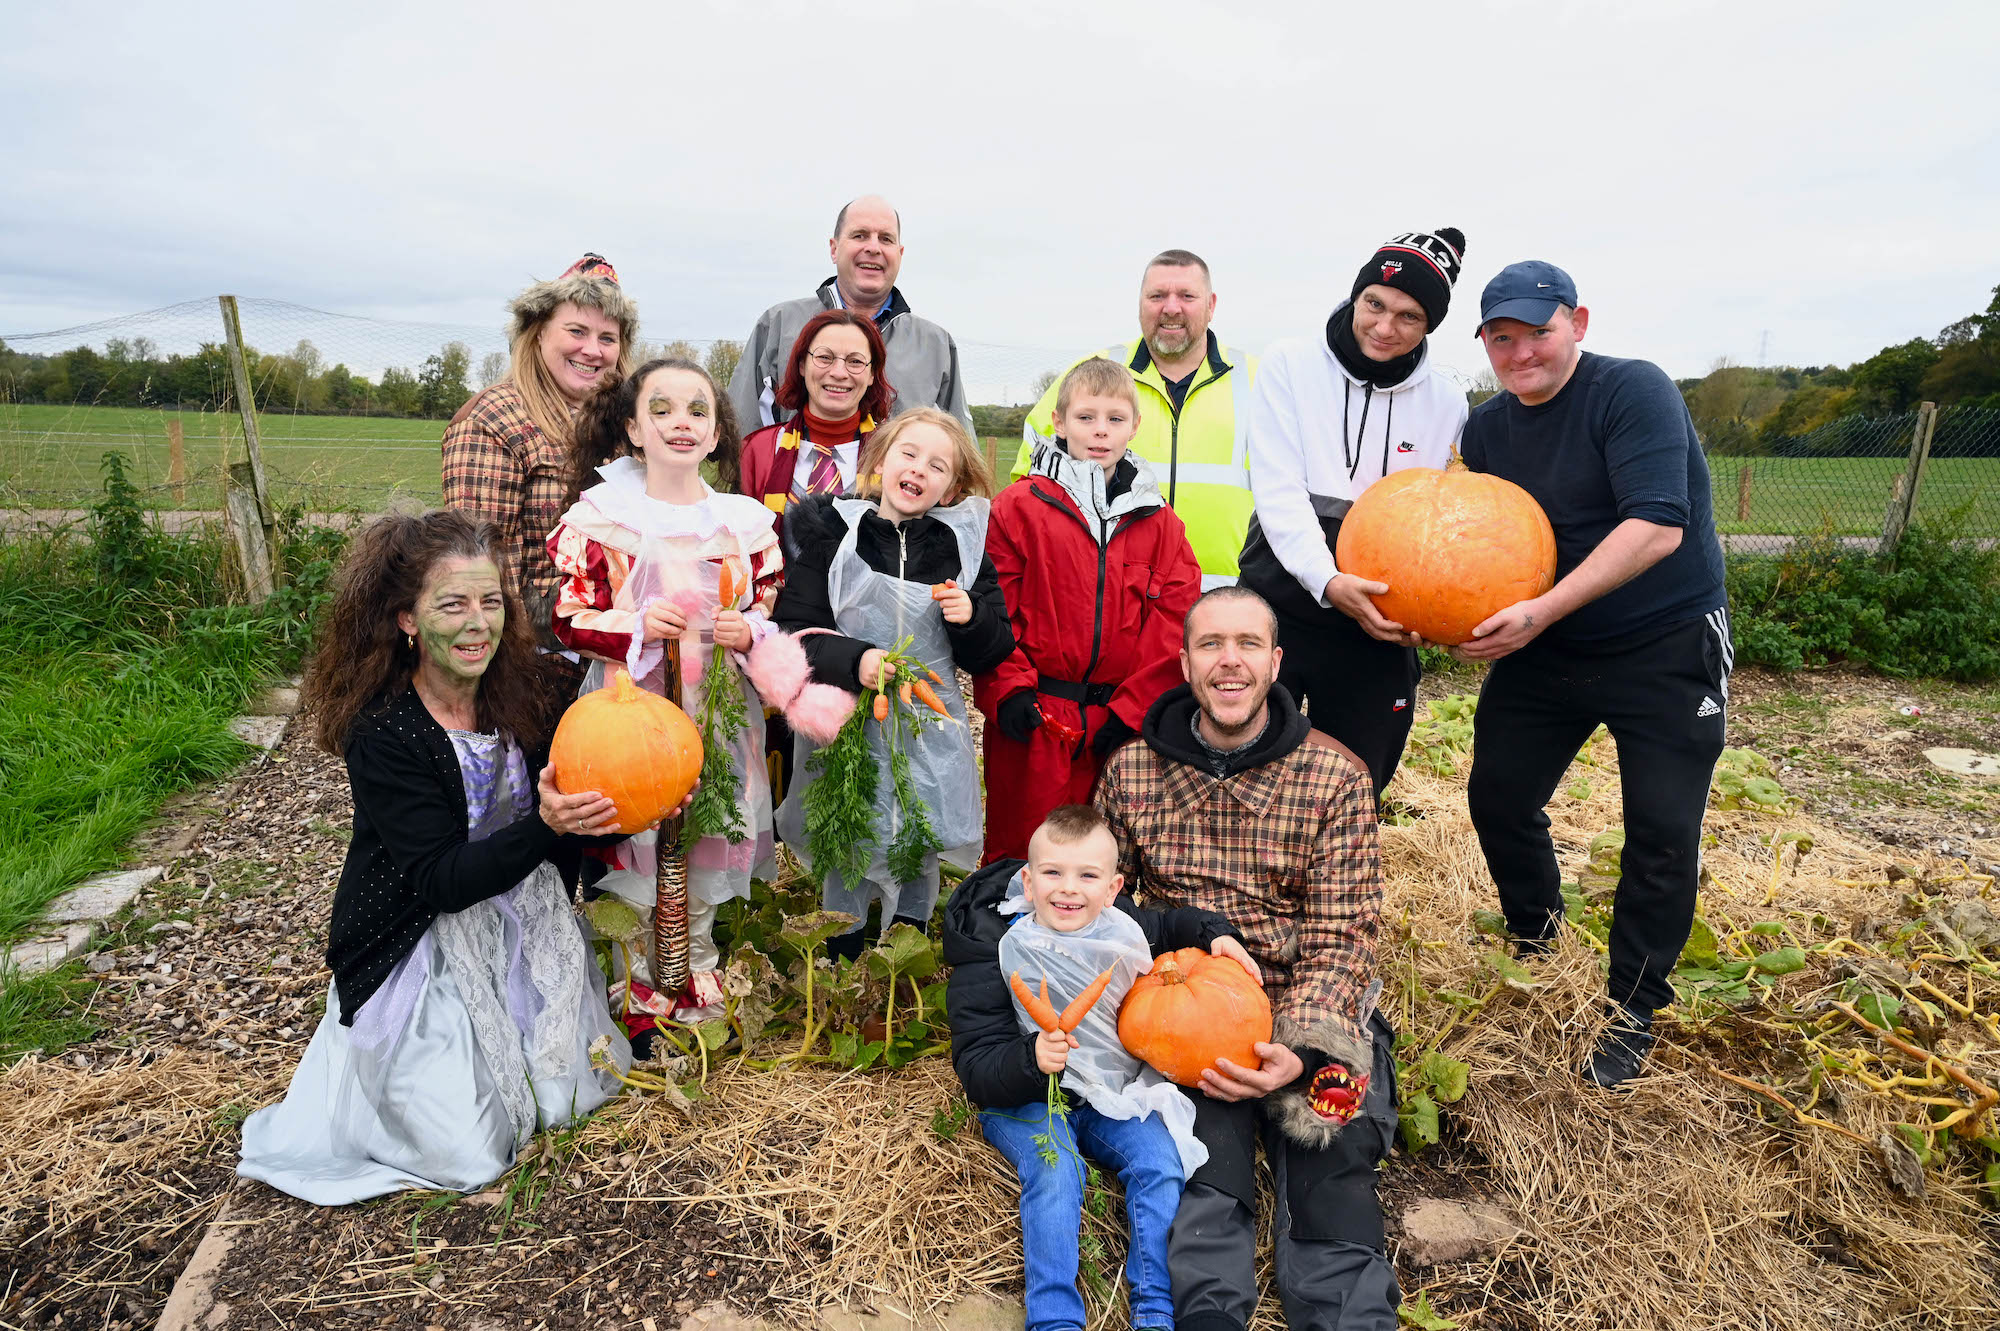 Community payback scheme comes to fruition for Halloween